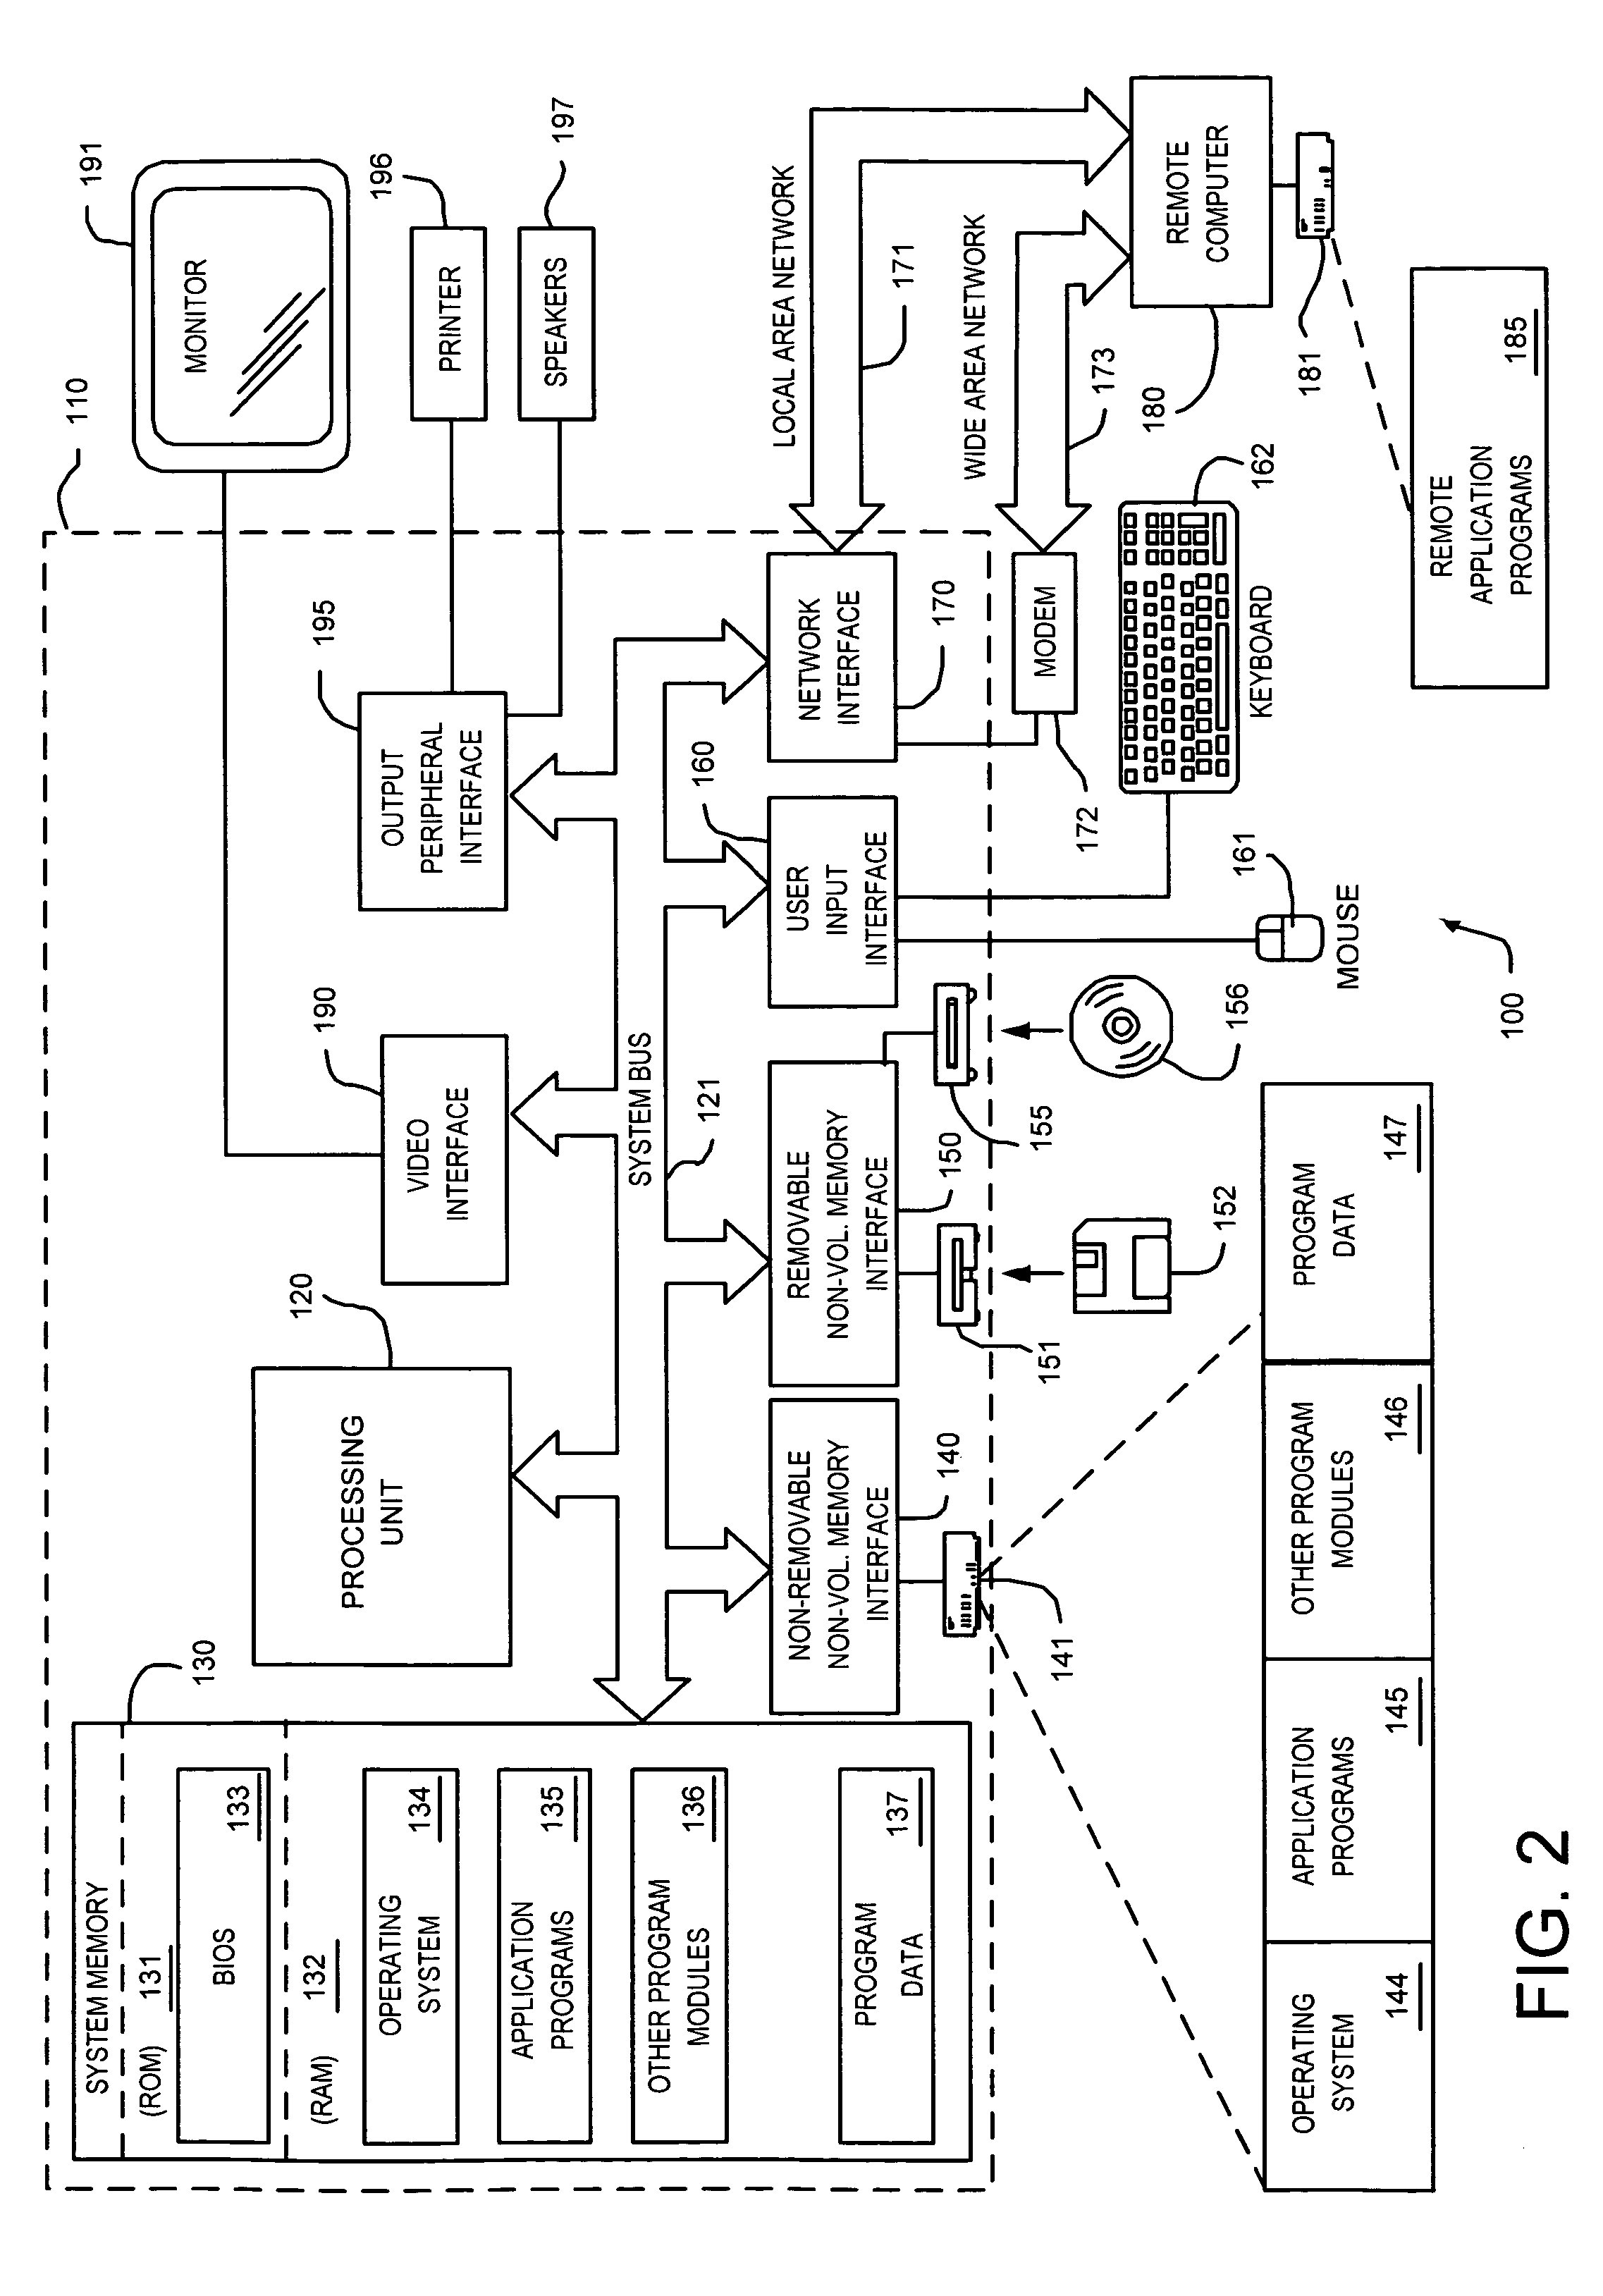 System and method for spam identification